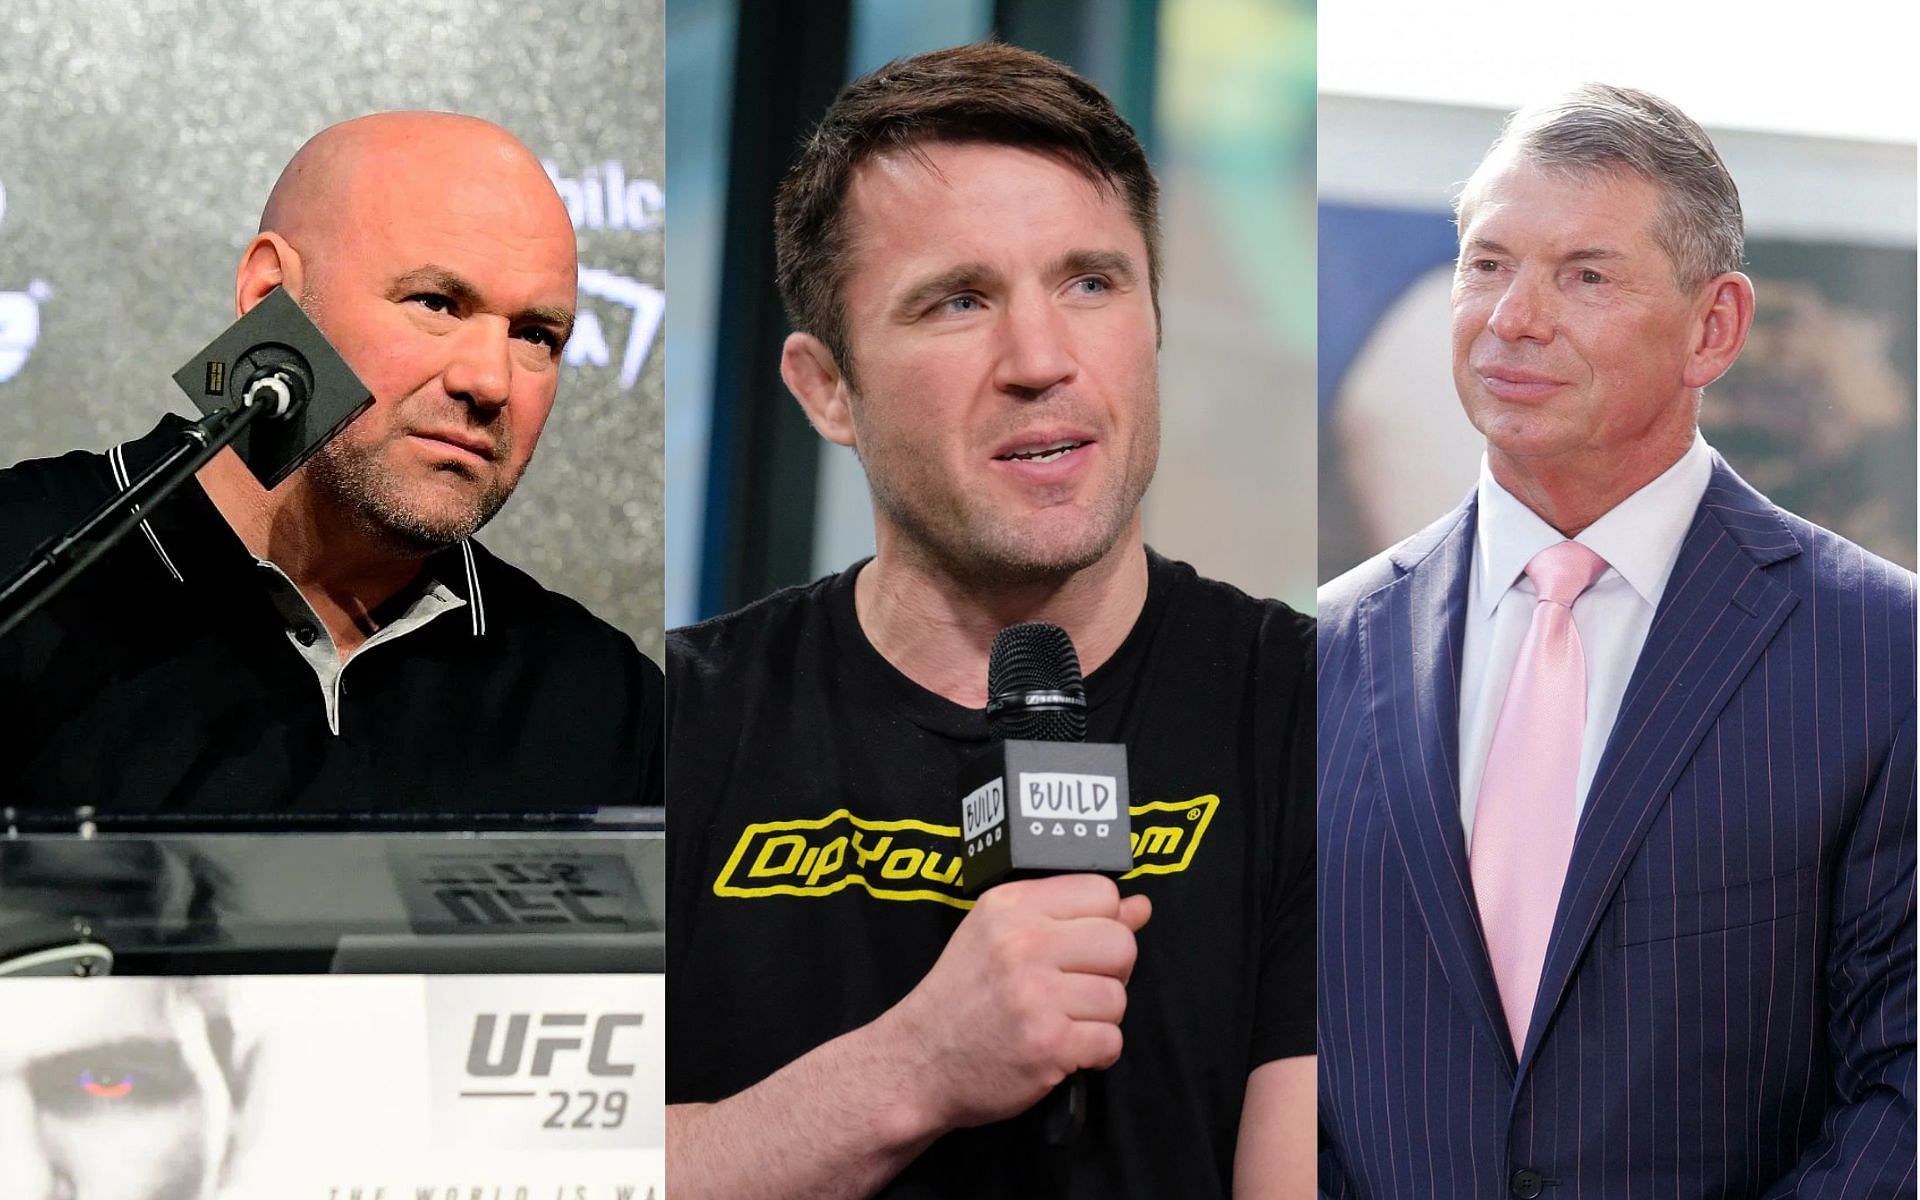 Dana White (left), Chael Sonnen (middle) and Vince McMahon (right)